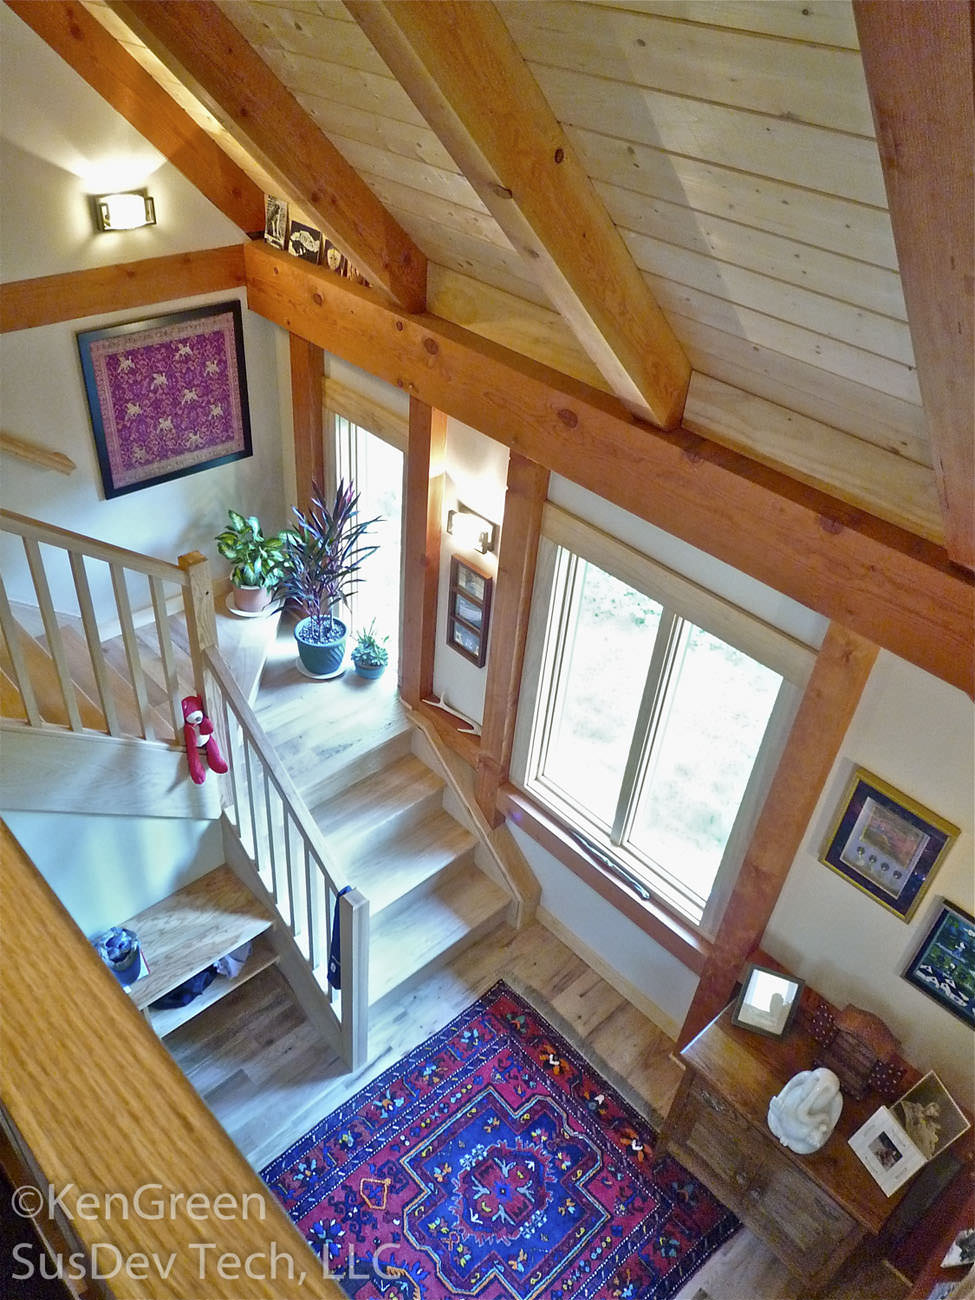 GREENNEST, Annapolis, MD (T00379) view down from loft with staircase to the left